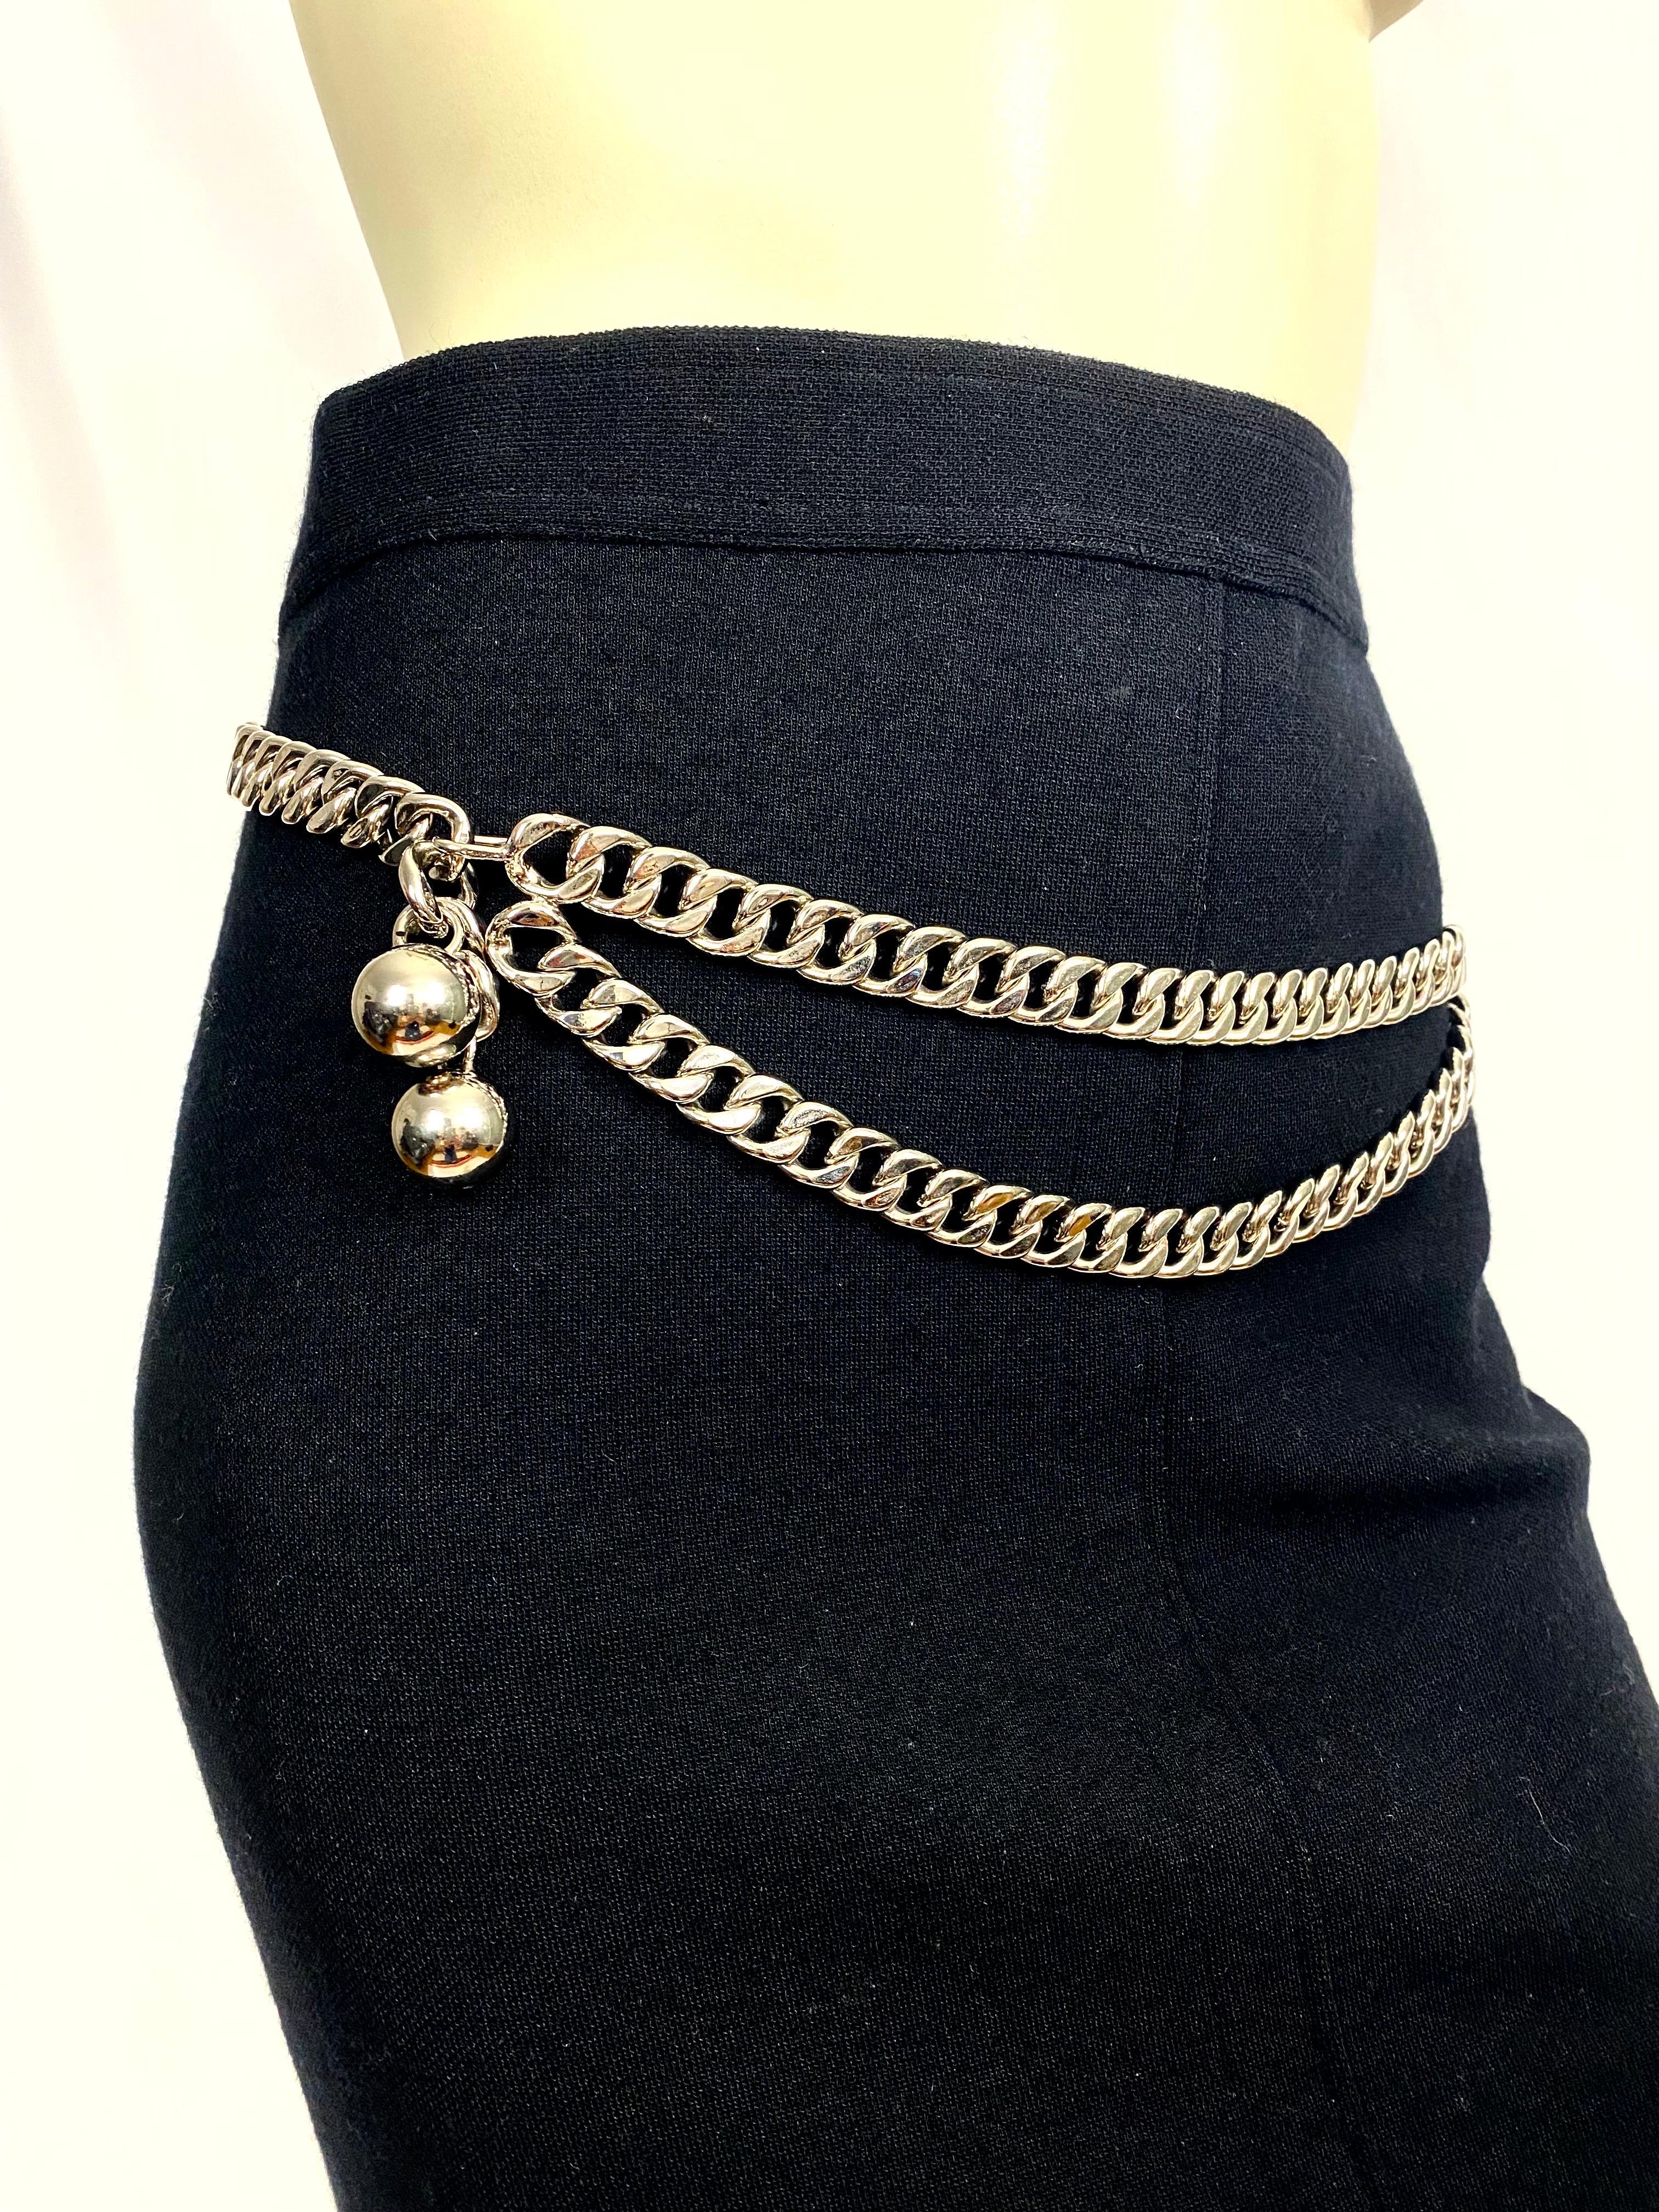 Vintage Chanel heavy silver chain link belt For Sale 3